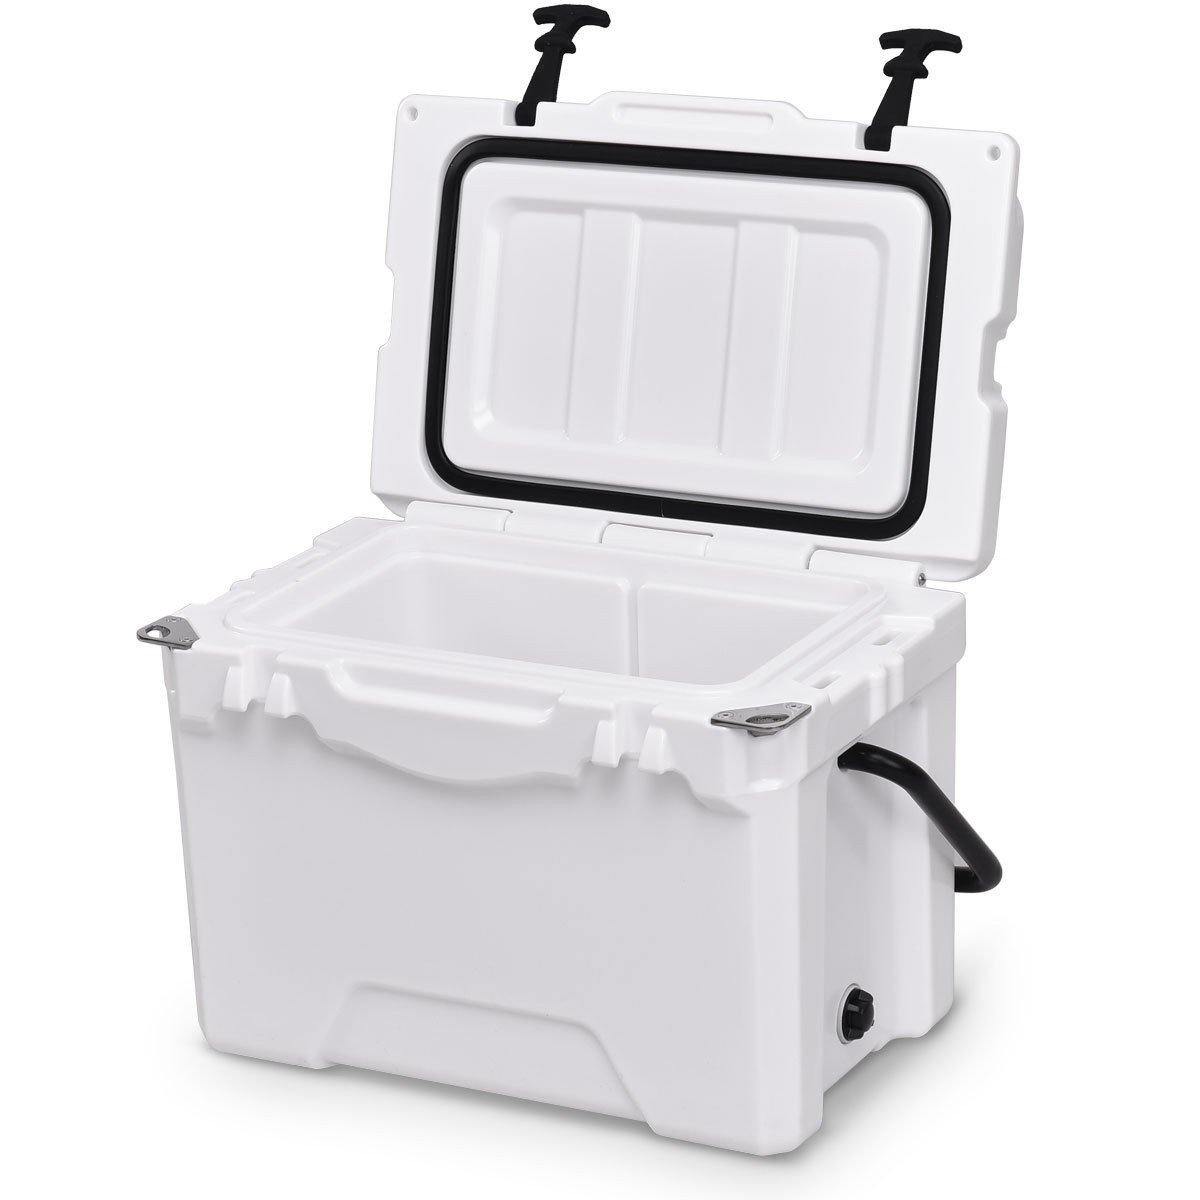 20 Quart Portable Cooler Ice Chest Outdoor Insulated Heavy Duty Cooler - Giantexus